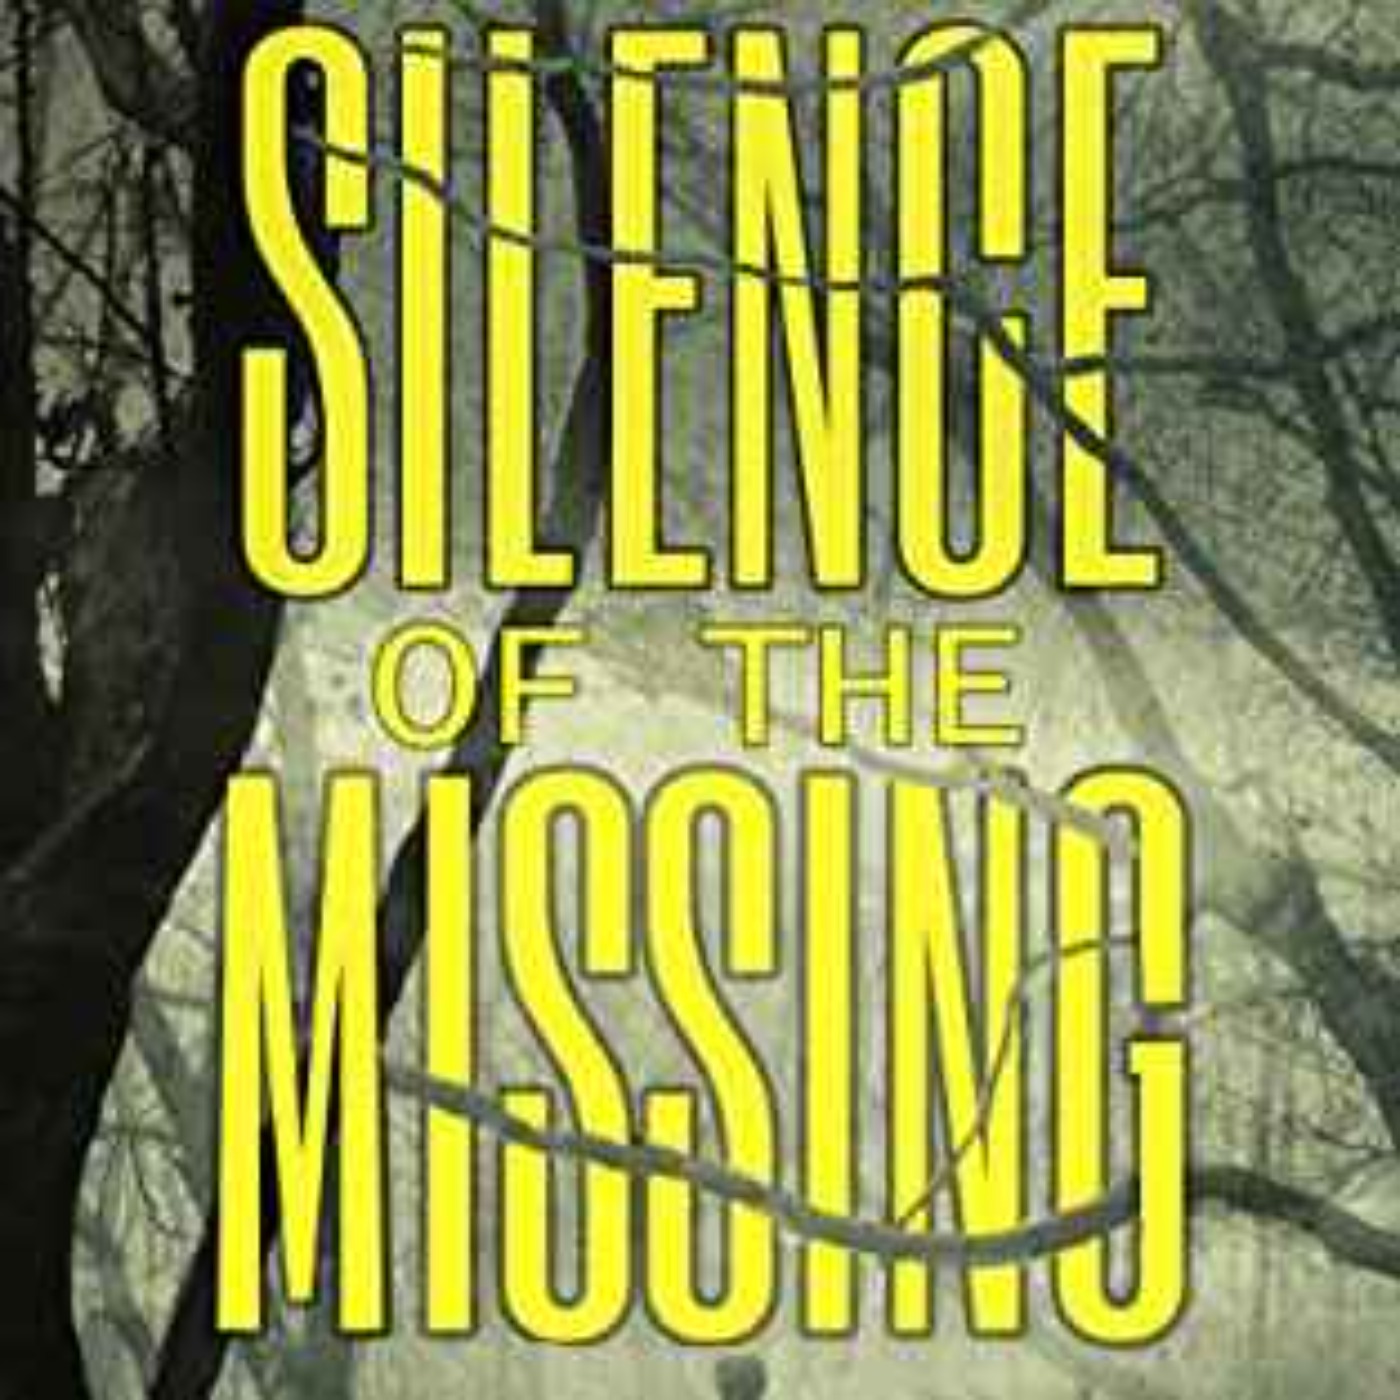 Rick R Reed - Silence of the Missing